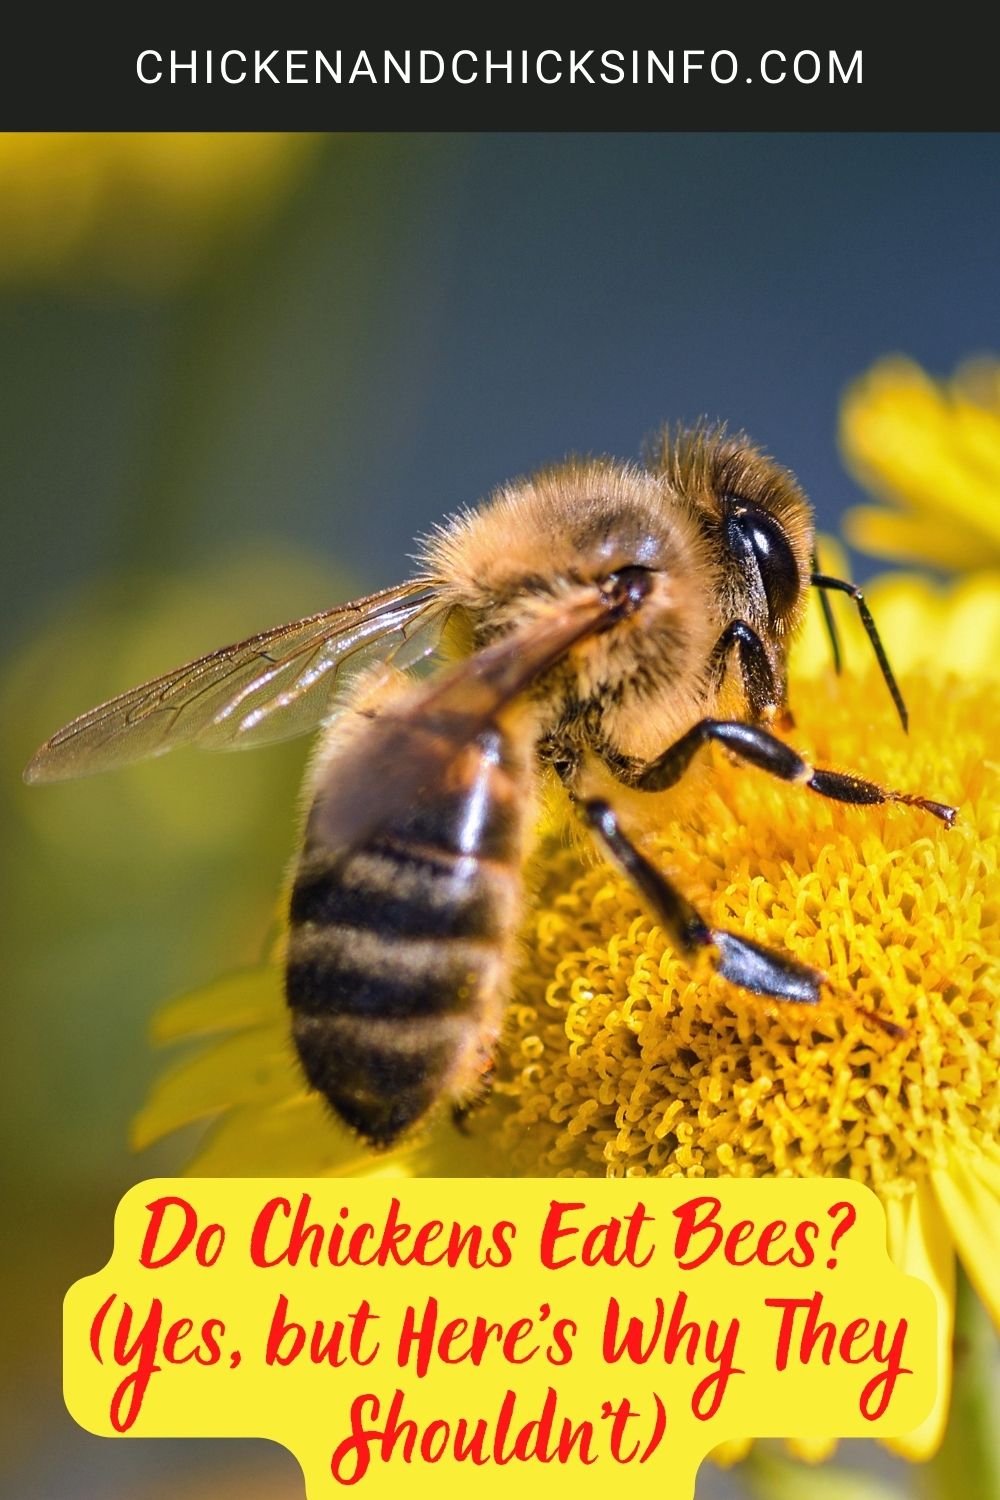 Do Chickens Eat Bees? (Yes, but Here's Why They Shouldn't) poster.
